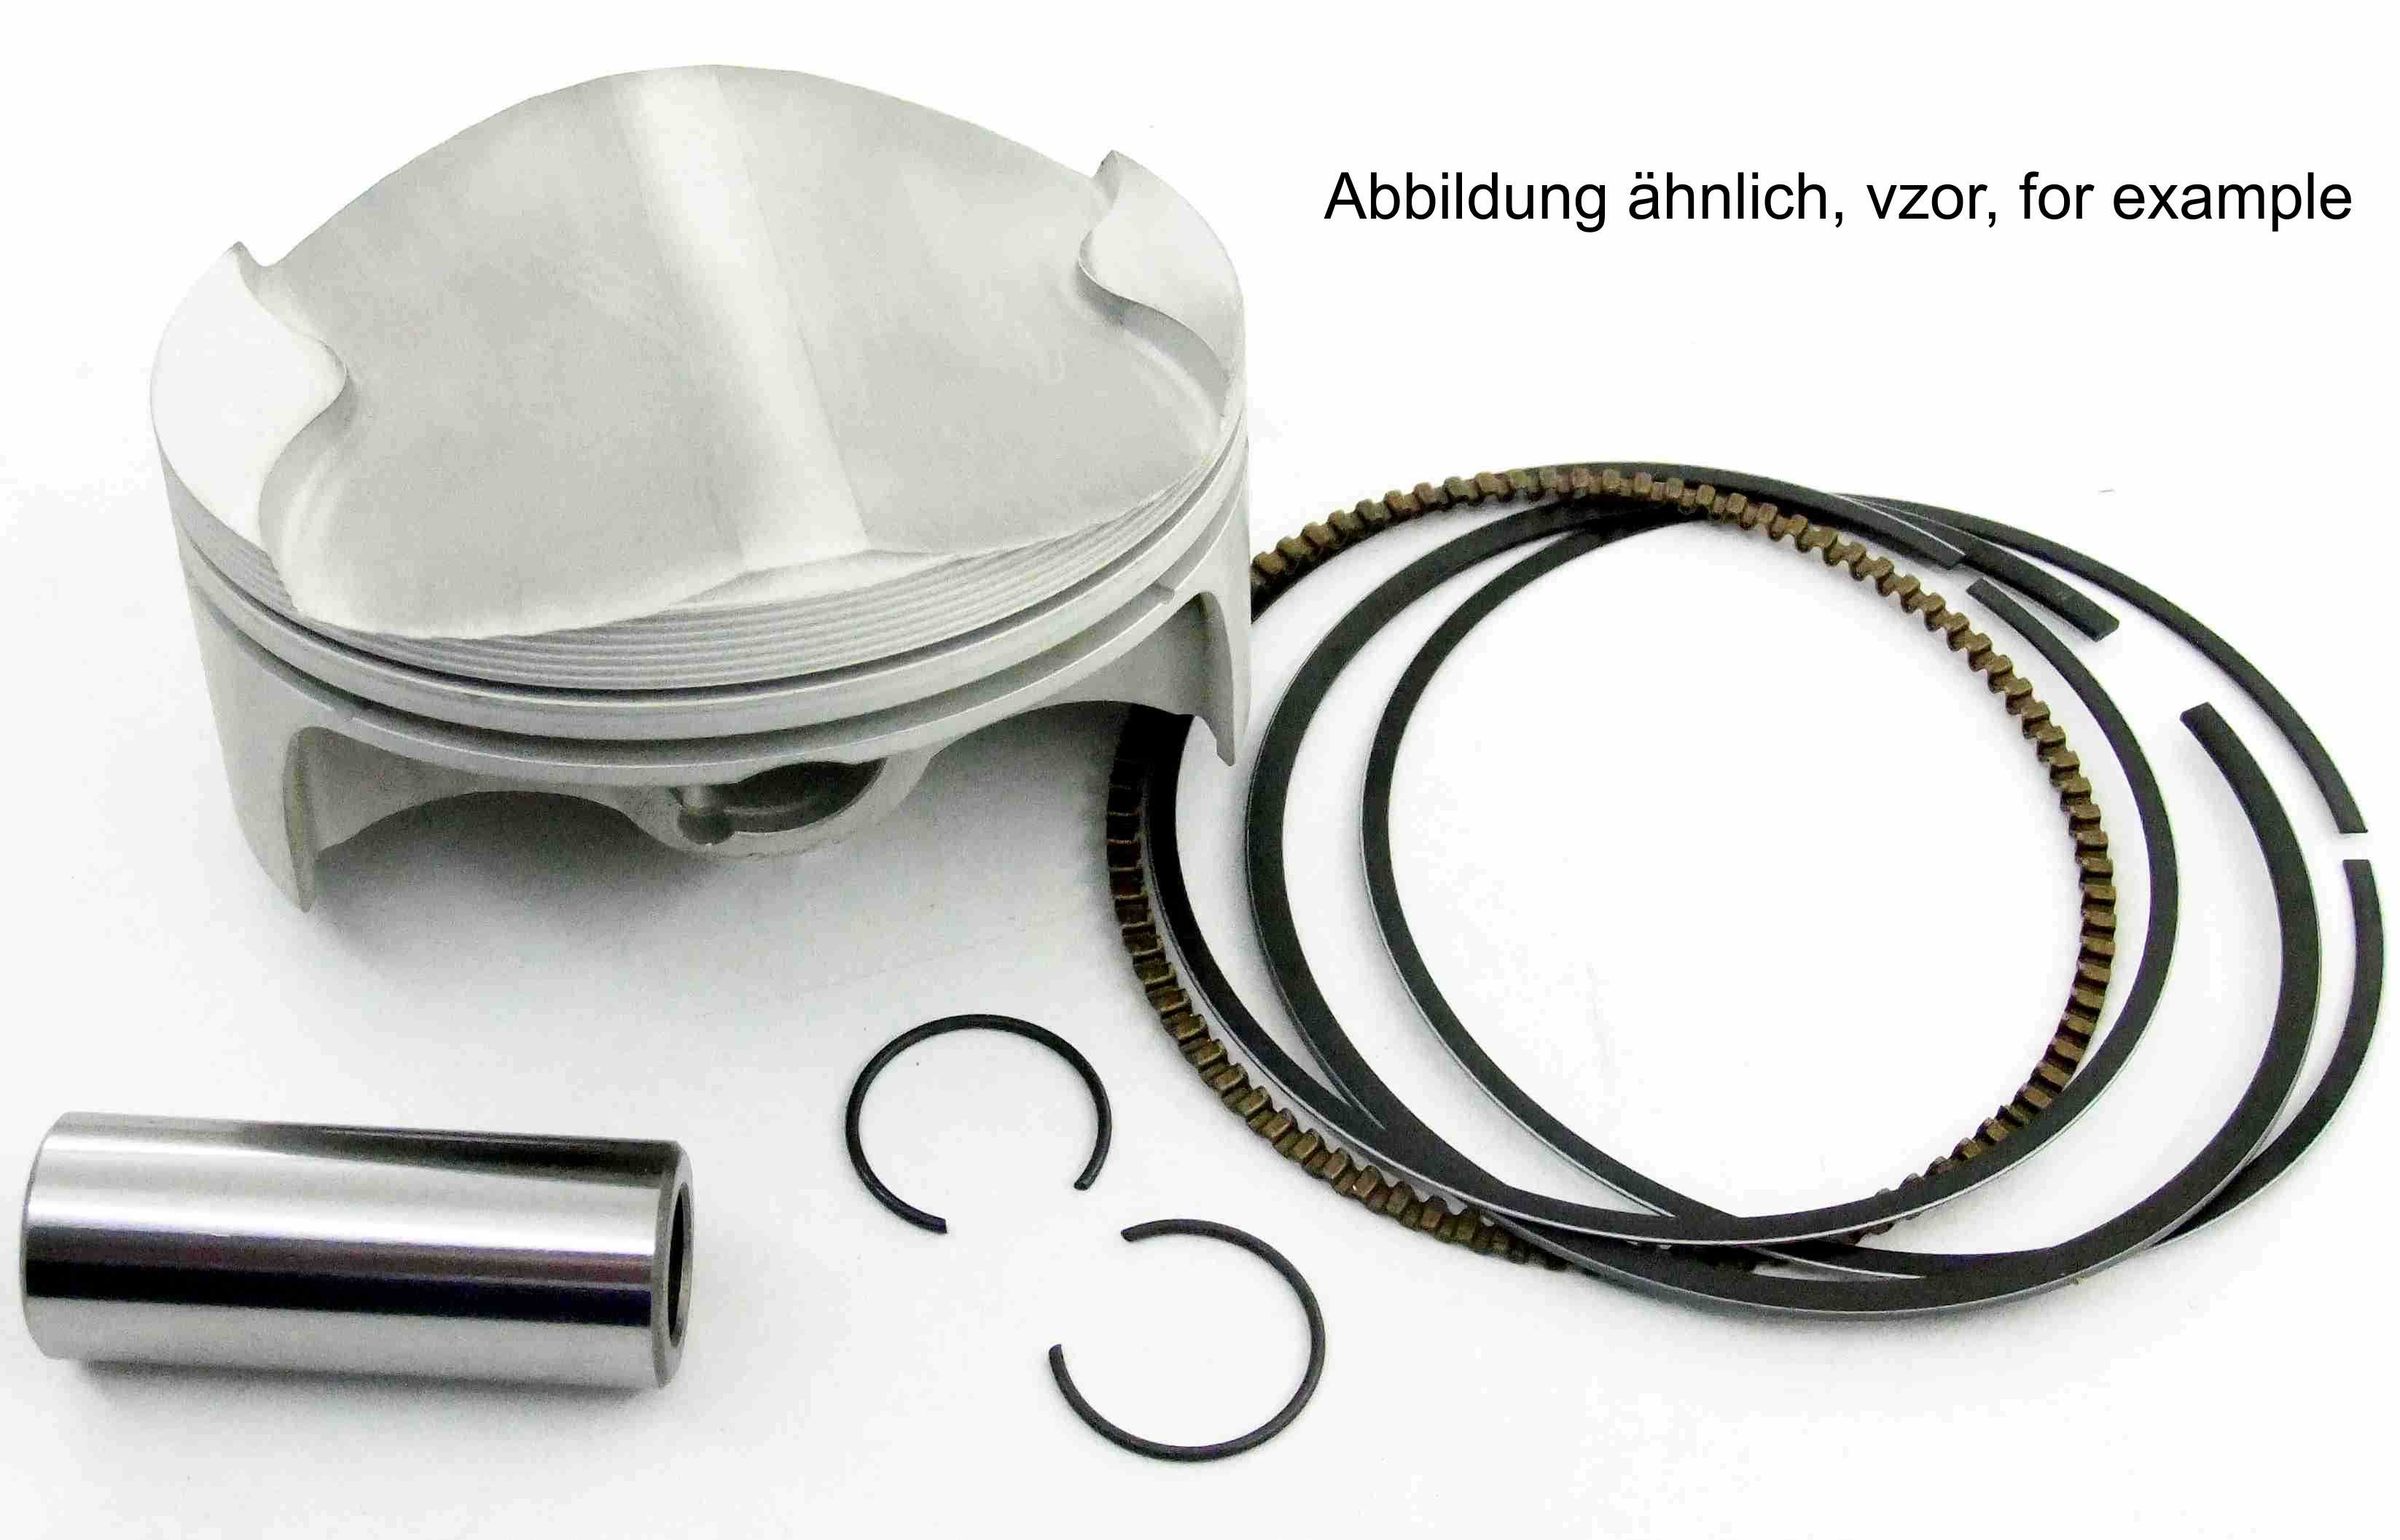 SCHREMS PISTON KIT FORGED, HIGH COMPR. 14.2:1 HONDA CRF 250R 10- 76.77 MM